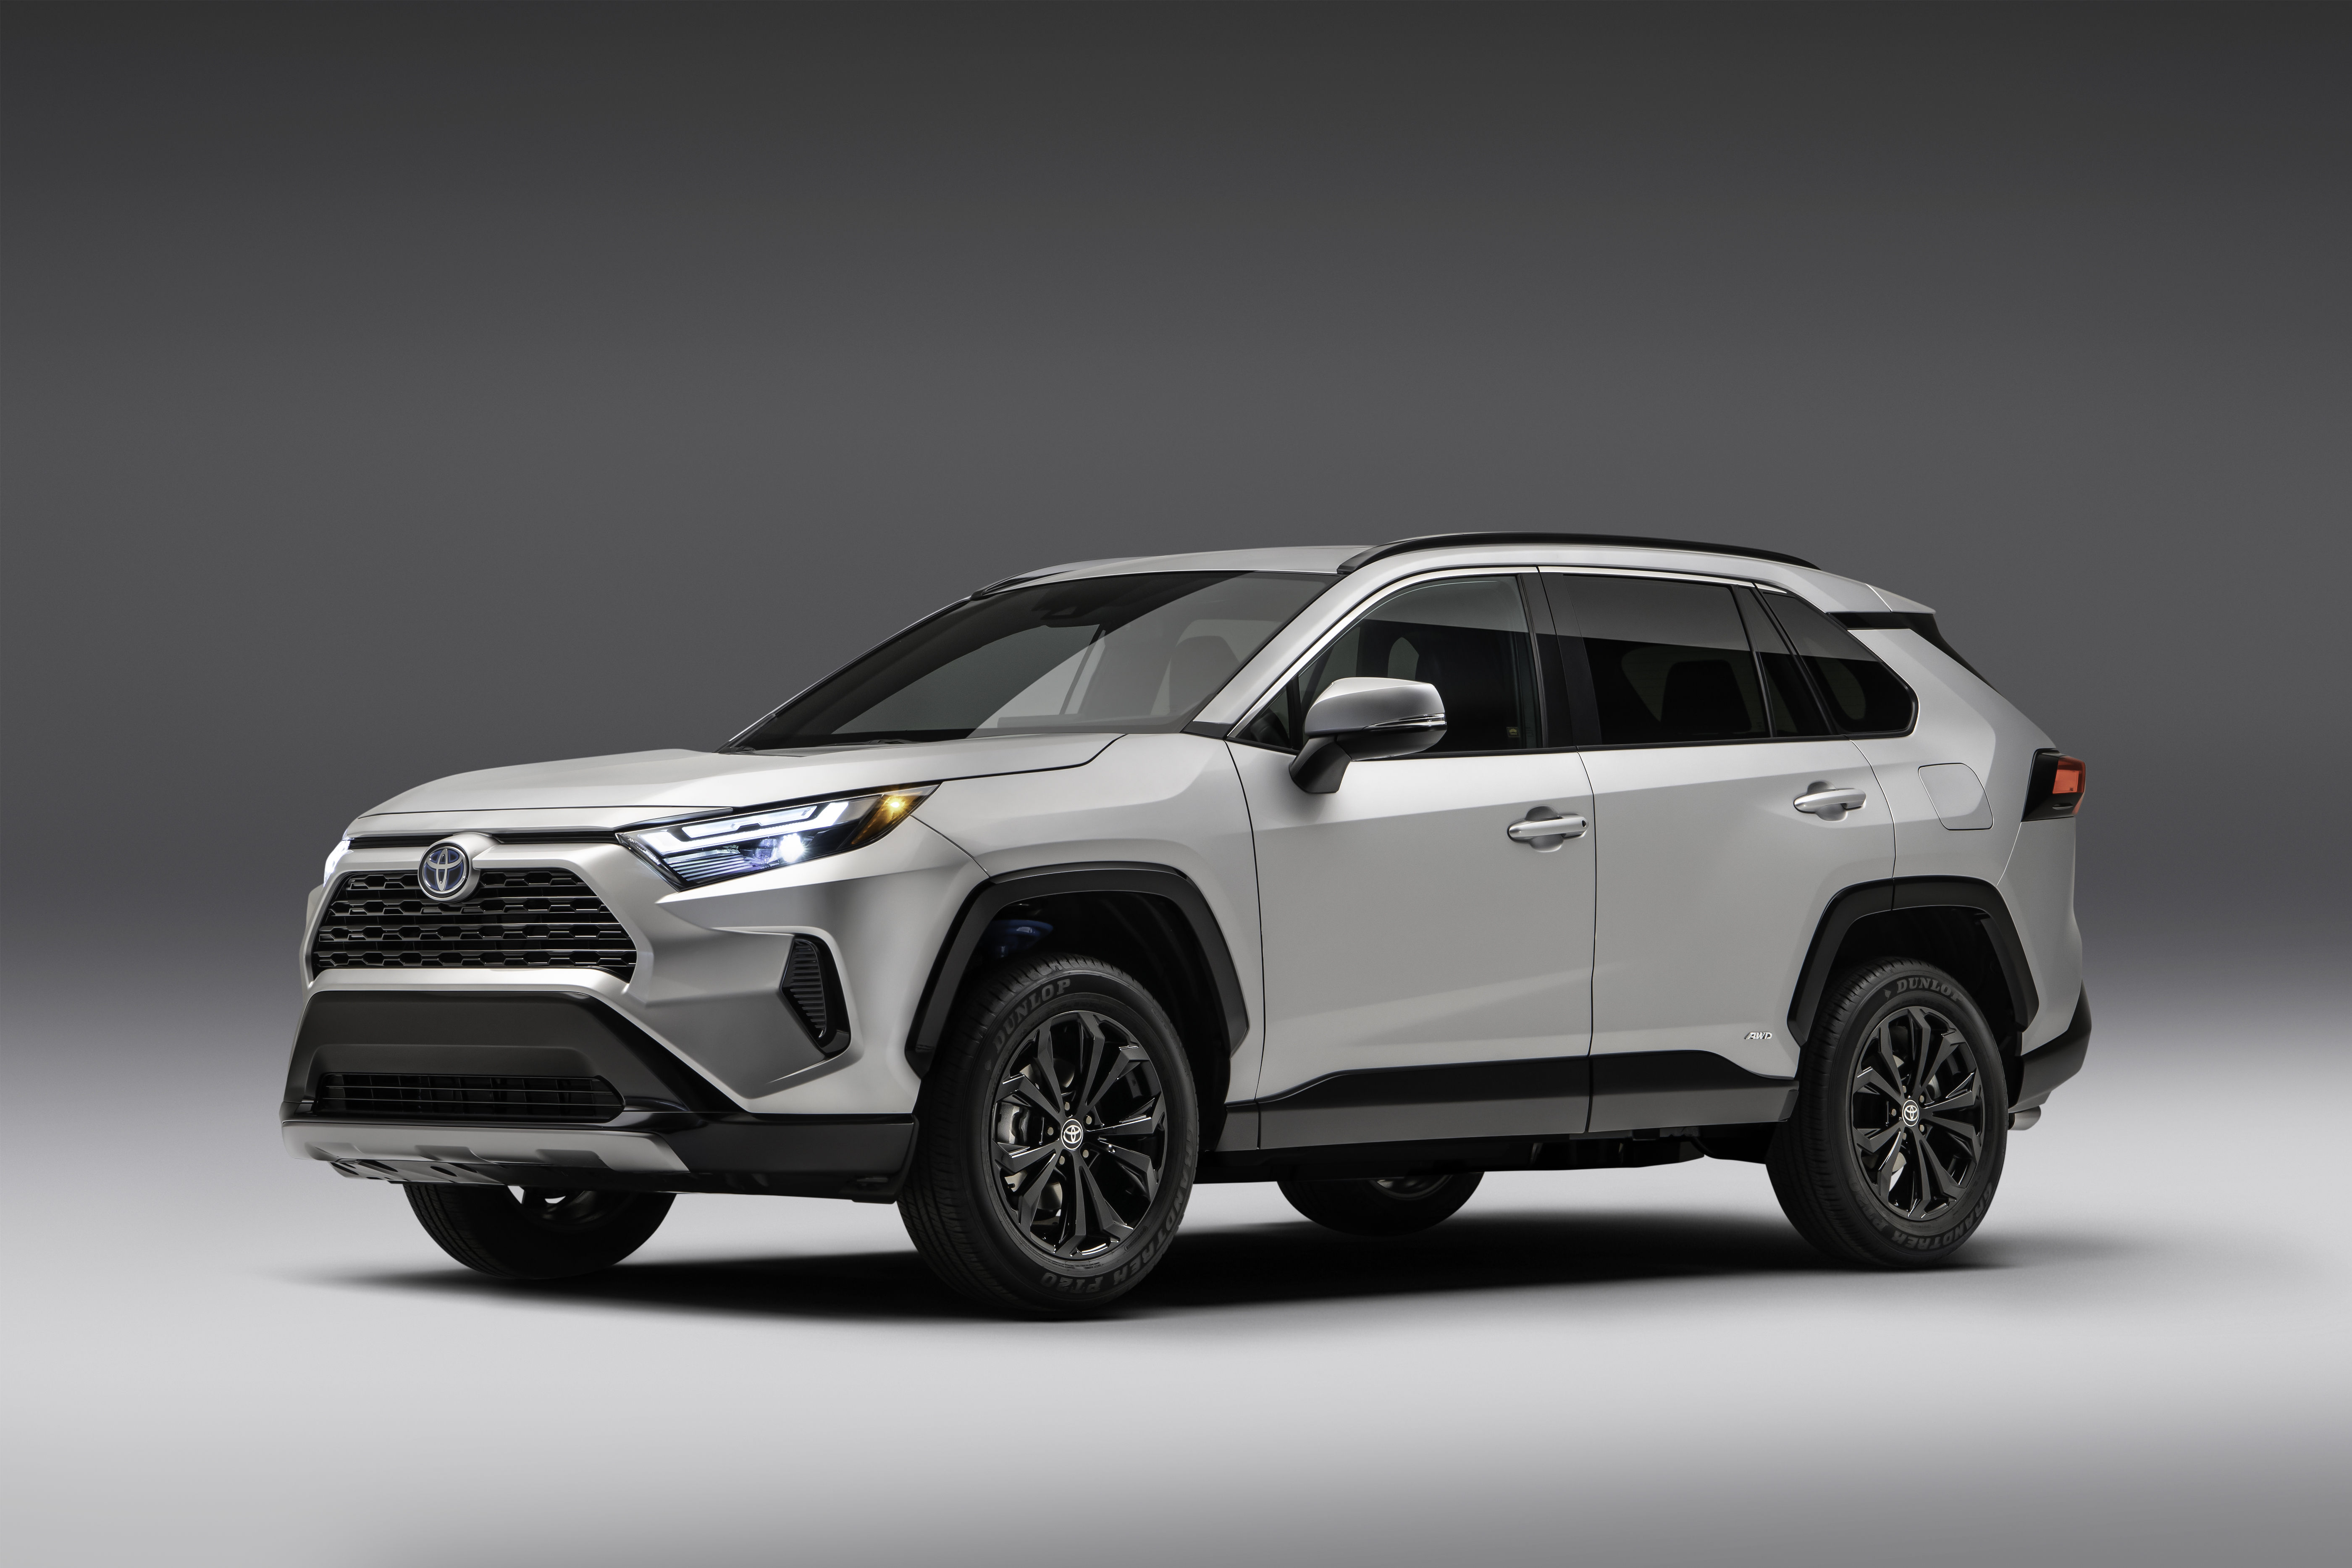 Toyota Celebrates Camry and RAV4 with New Trims